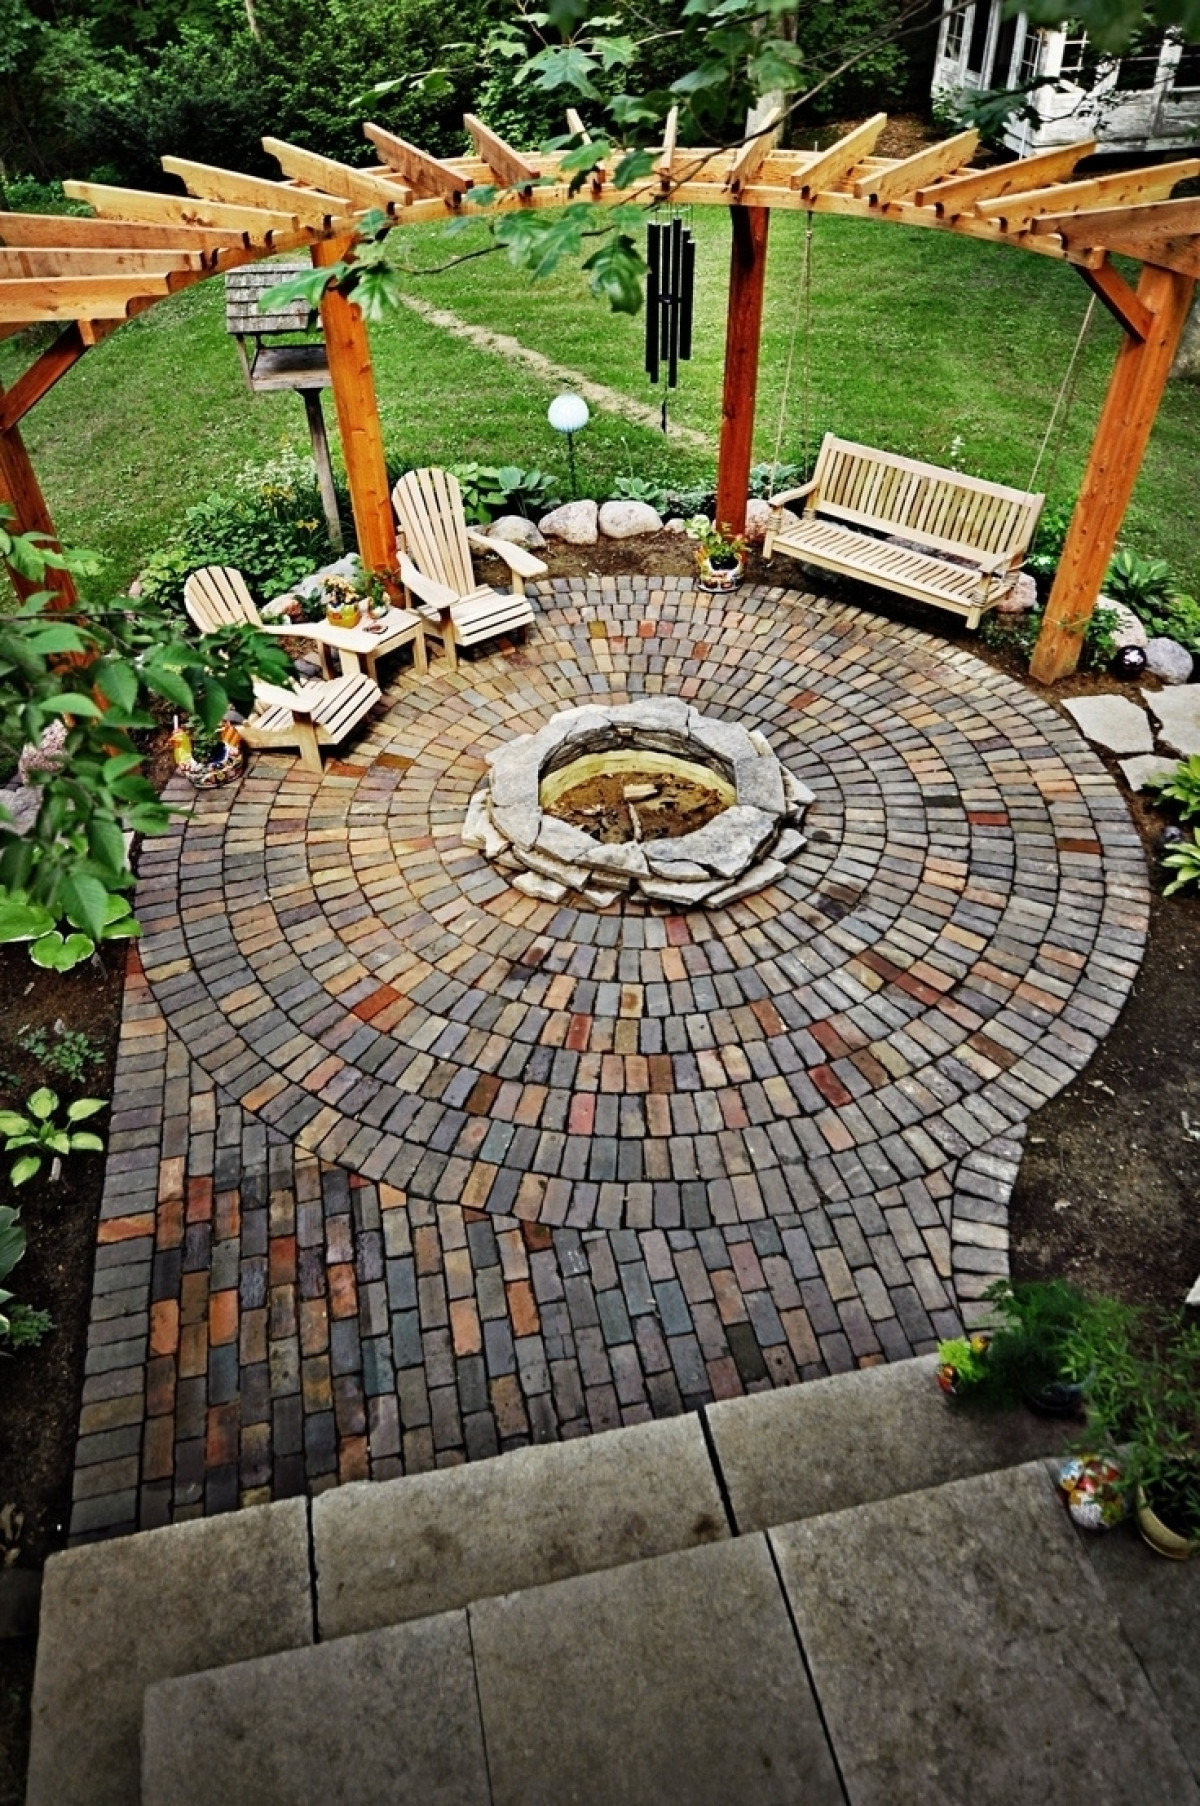 Fire Pits For Patio
 50 Best Outdoor Fire Pit Design Ideas for 2019